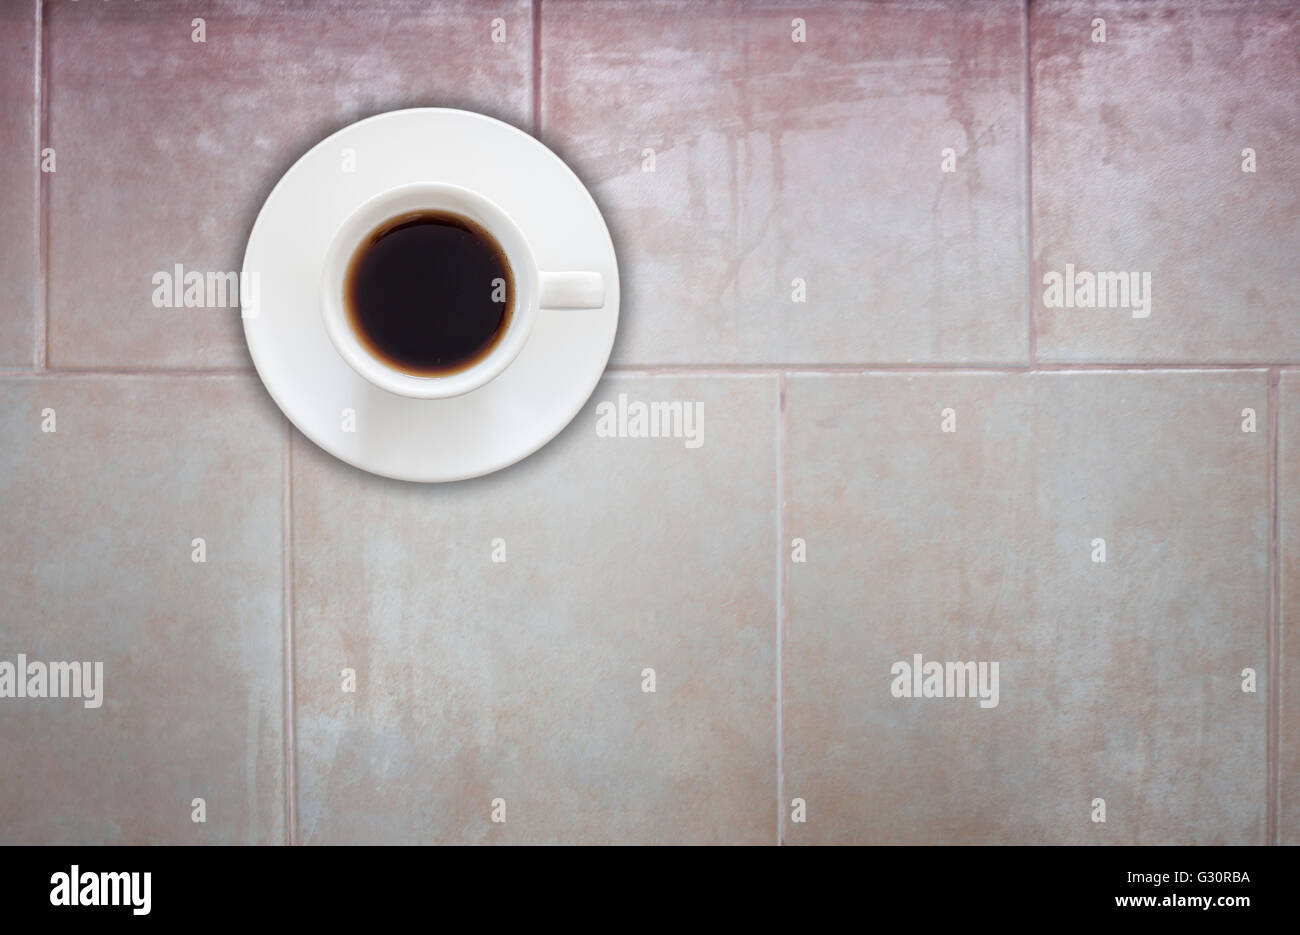 Top view of coffee cup on ceramic tiles wall texture background Stock Photo